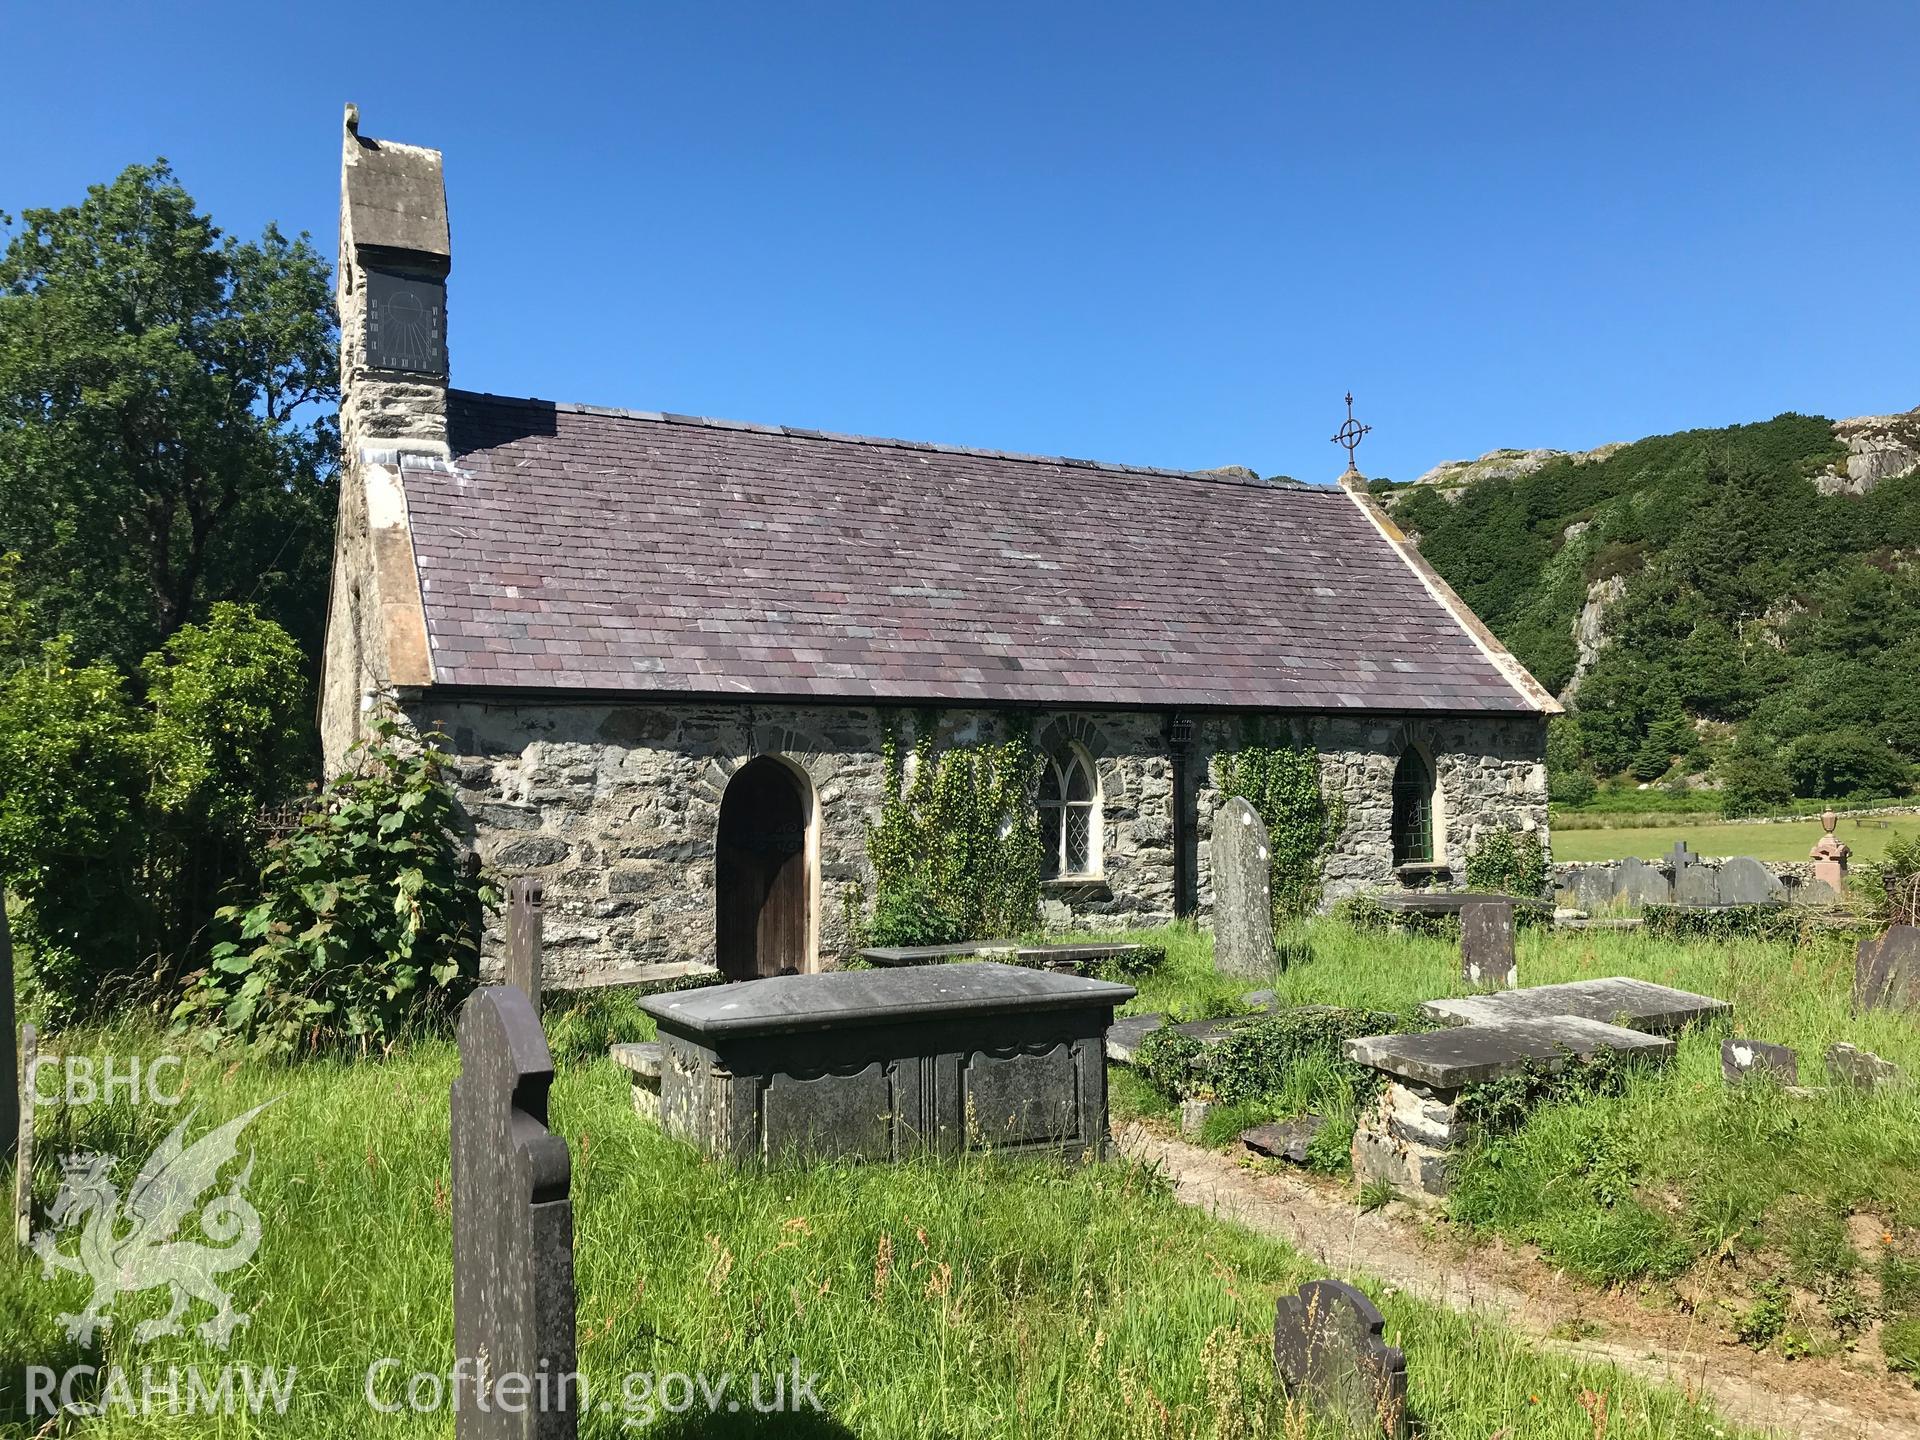 Colour photo showing external view of St. Mary's Church, Dolbenmaen, taken by Paul R. Davis, 22nd June 2018.